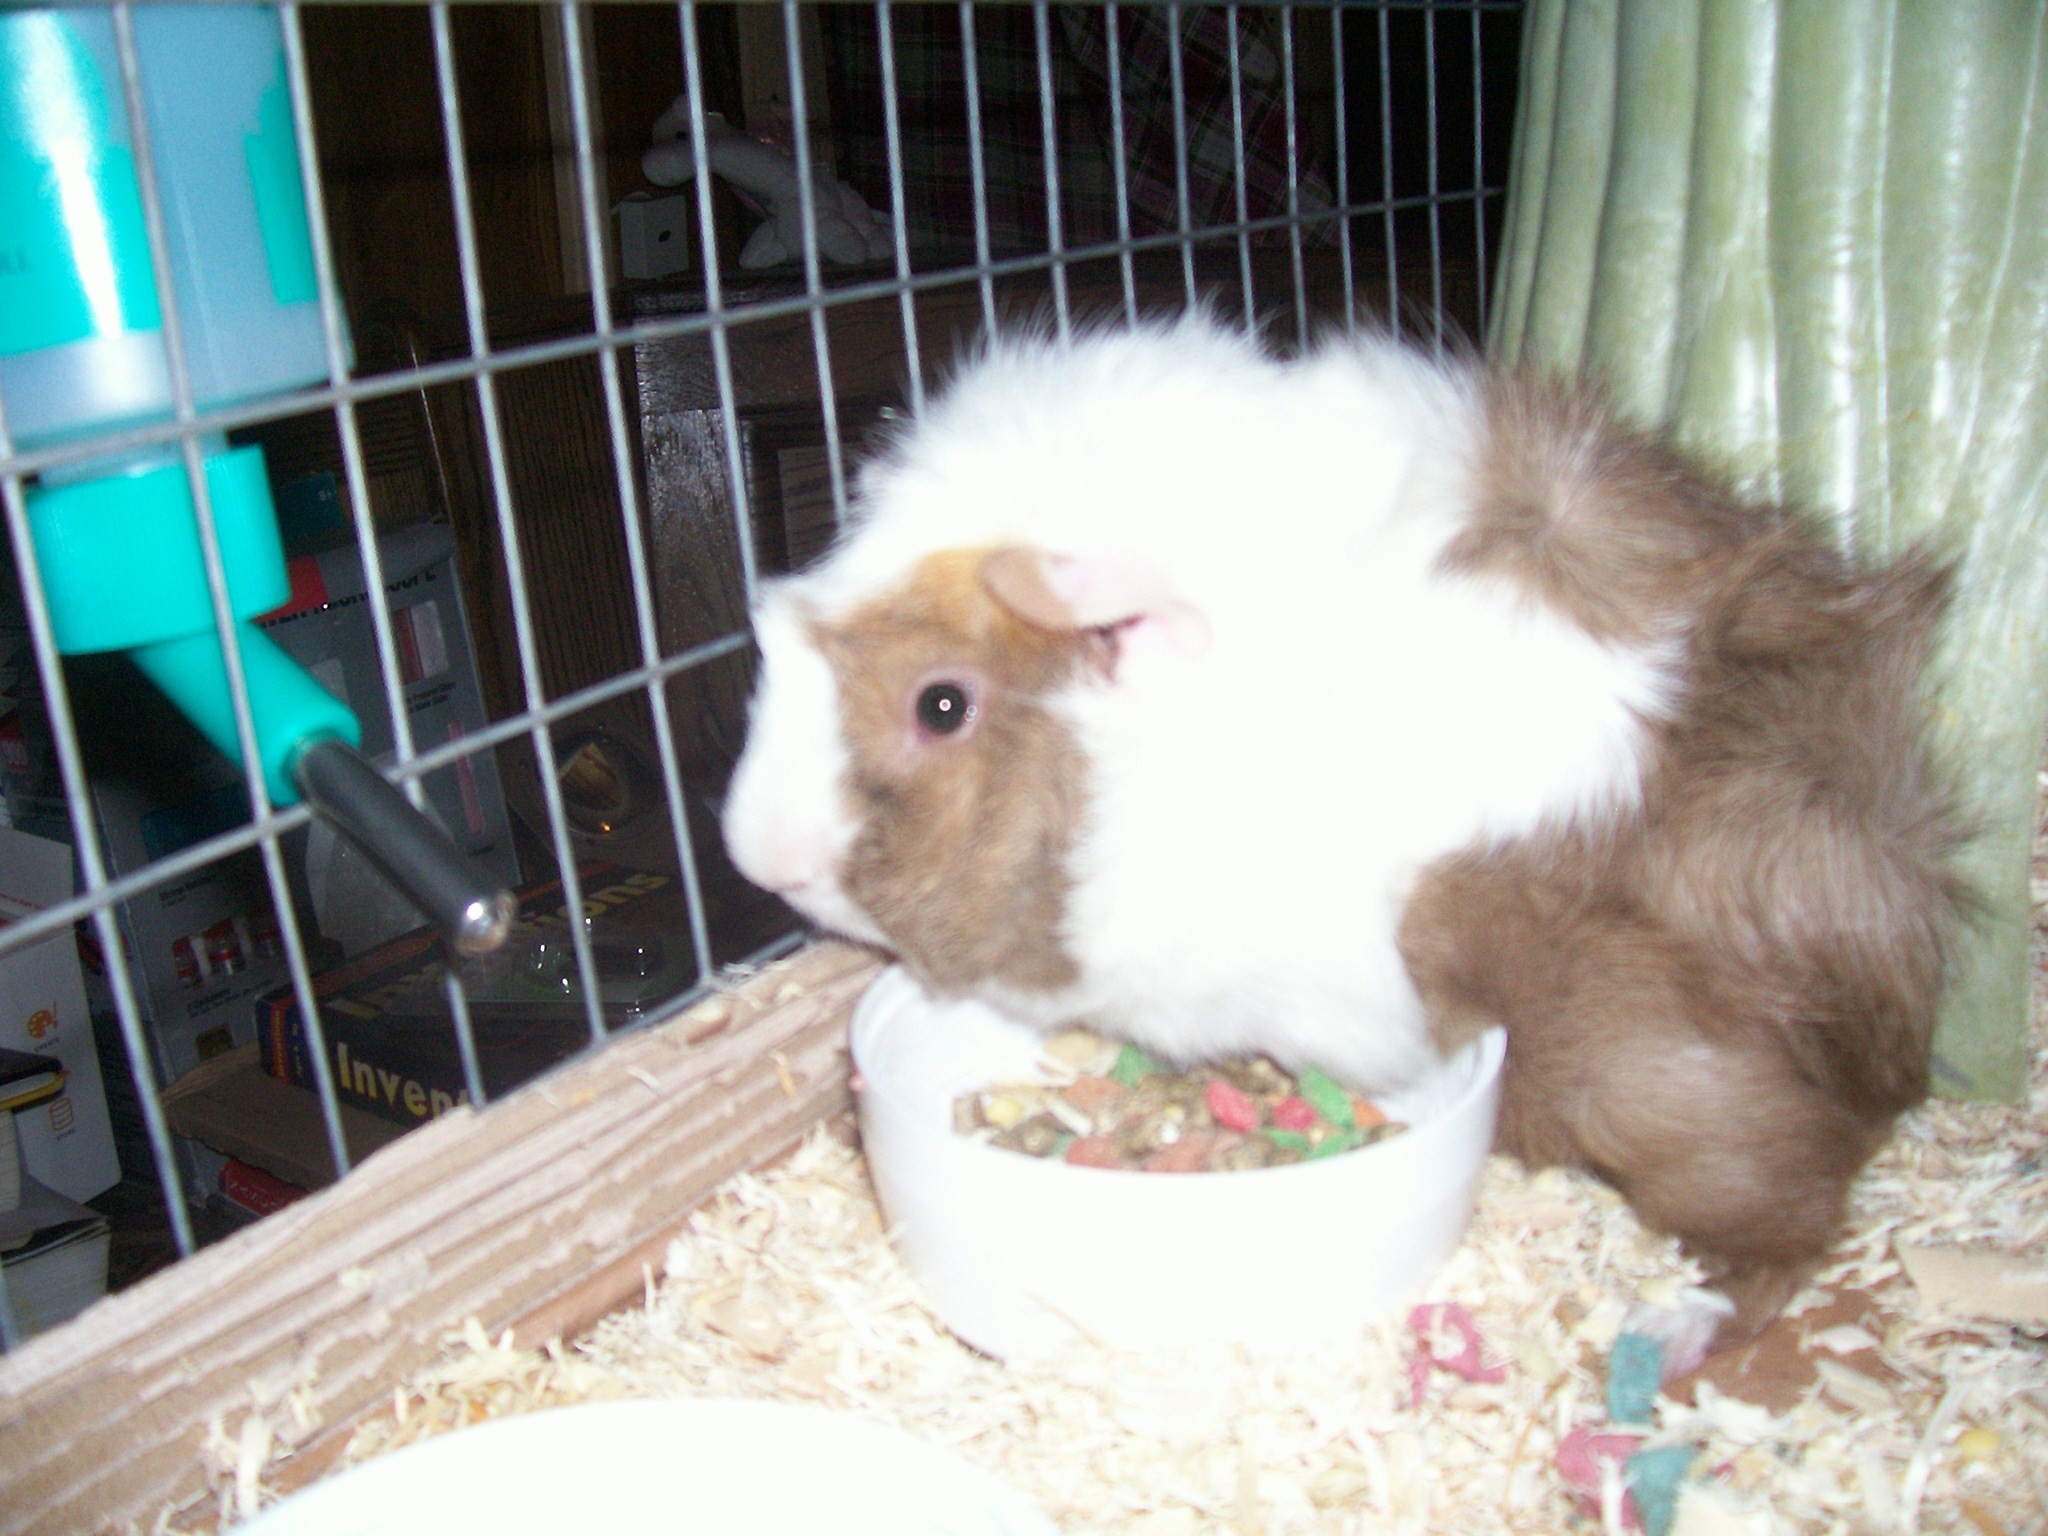 Catwings's guinea pig